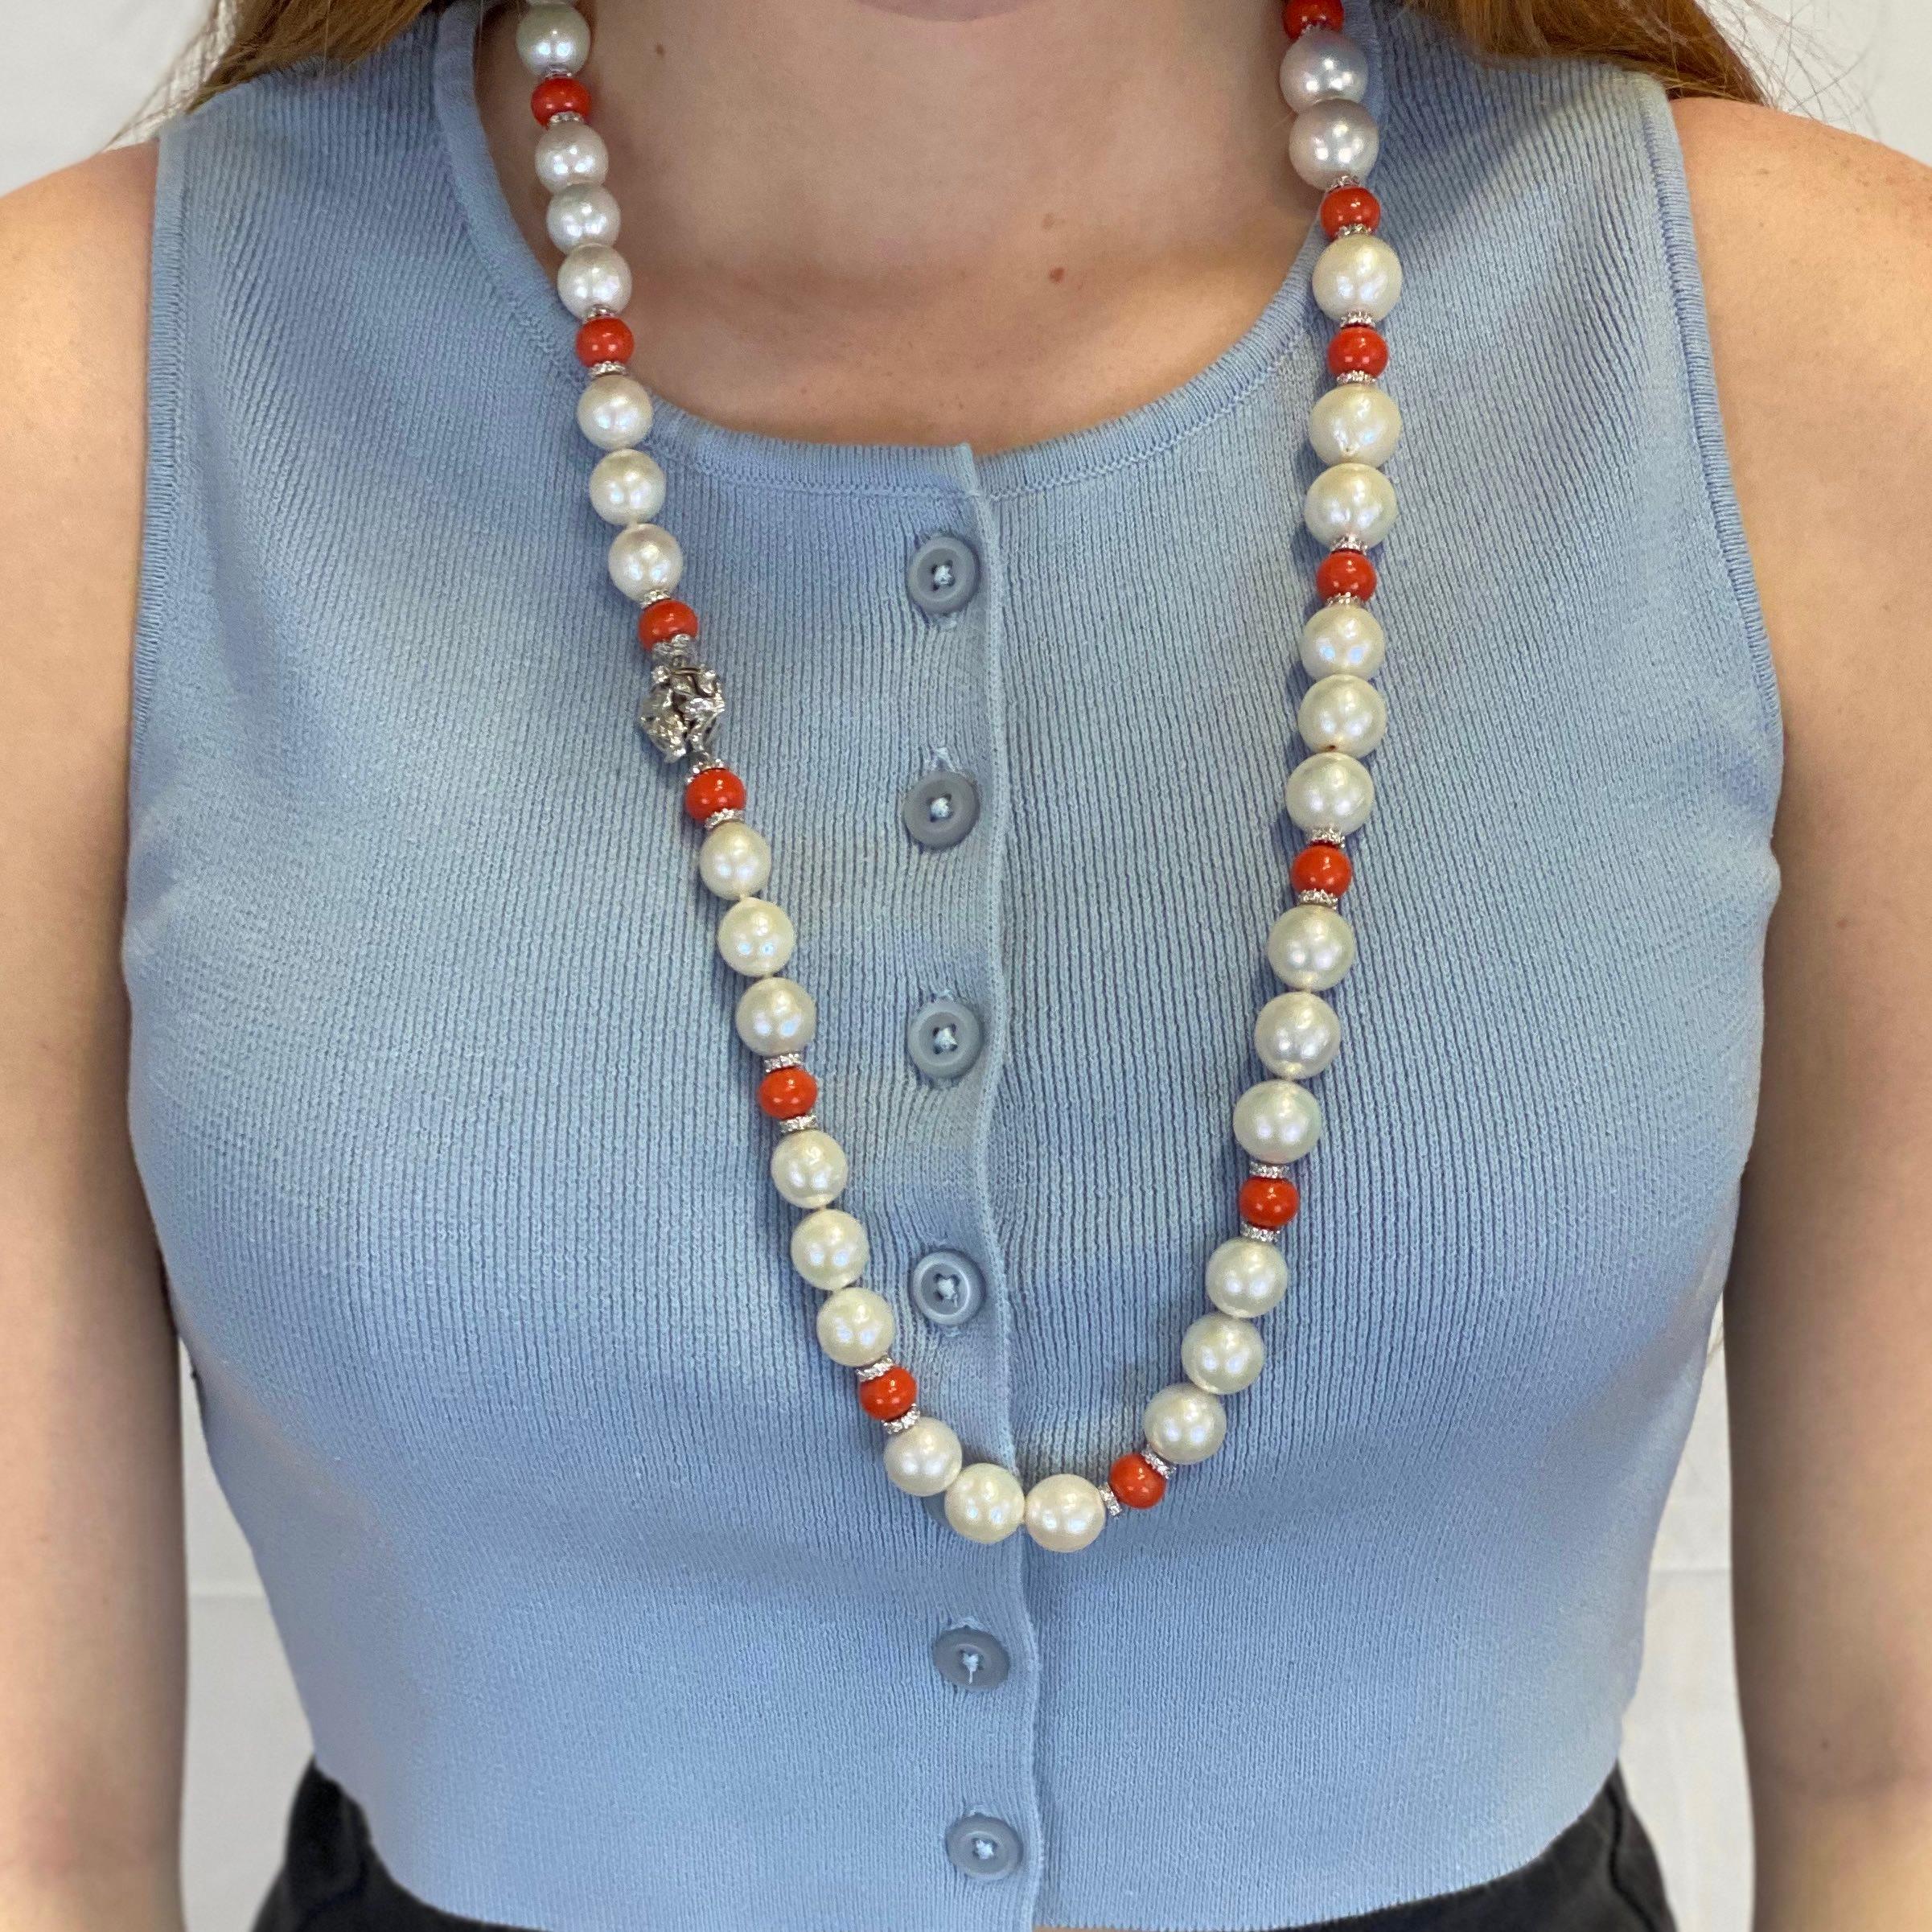 Fine Pearls = 12-14mm
Fine Coral = 10.5mm
Metal: 14K Gold
Clasp Made With Diamonds
Length: 24 Inches

Jewelry Gift Box Included